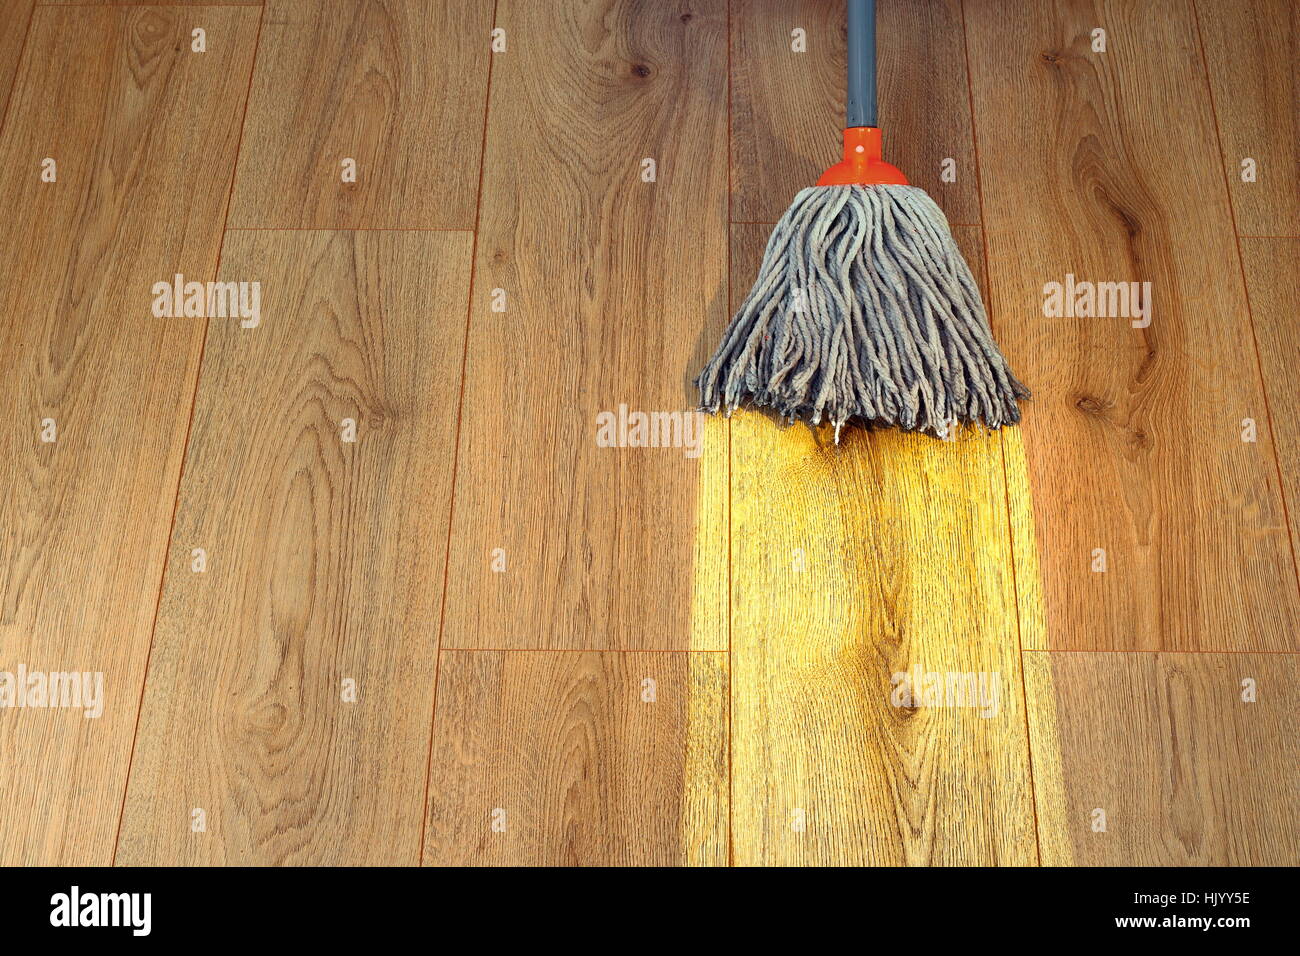 https://c8.alamy.com/comp/HJYY5E/close-up-of-cleaning-wooden-floor-with-a-mop-HJYY5E.jpg